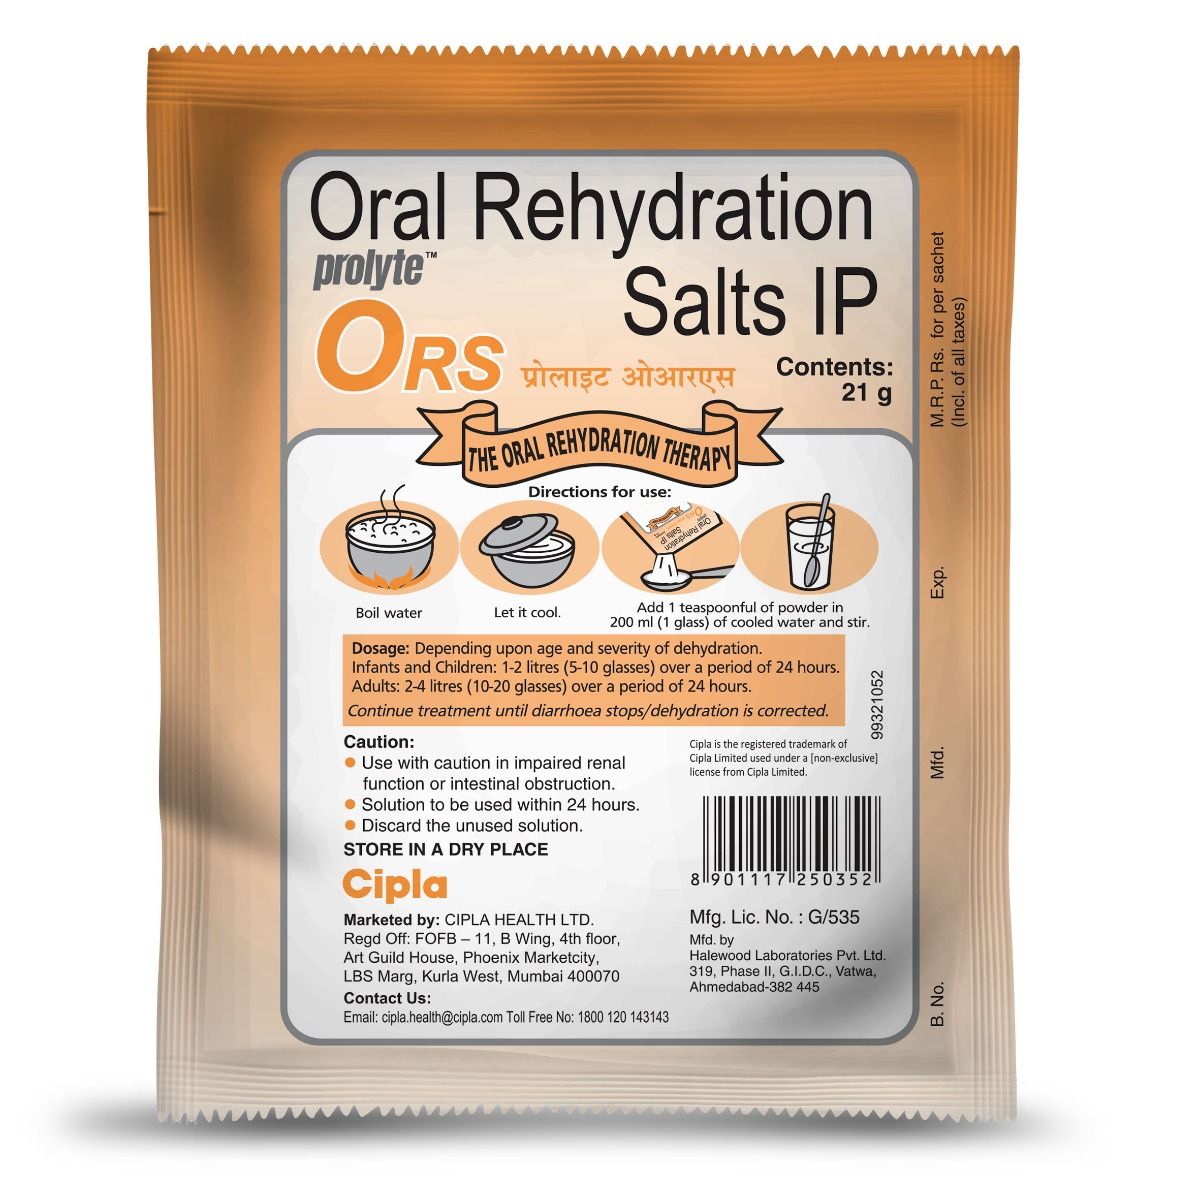 ORS Prolyte Orange Flavour Powder, 21 gm, Pack of 1 